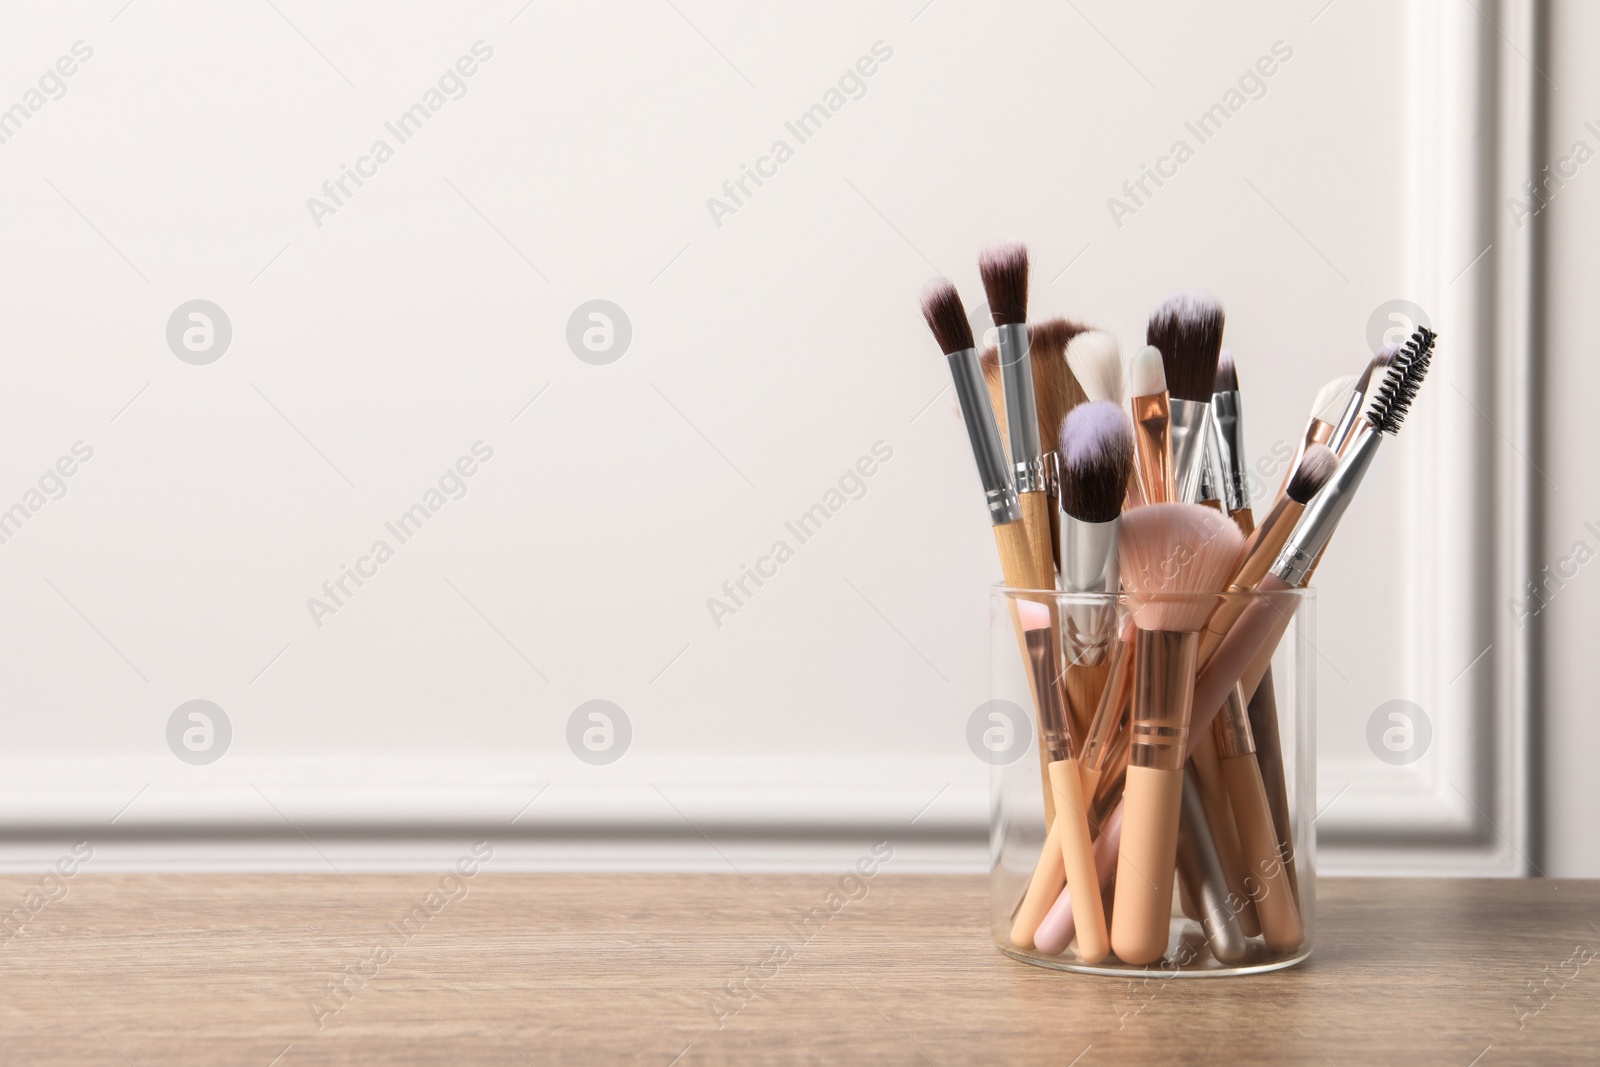 Photo of Set of professional makeup brushes on wooden table near white wall, space for text